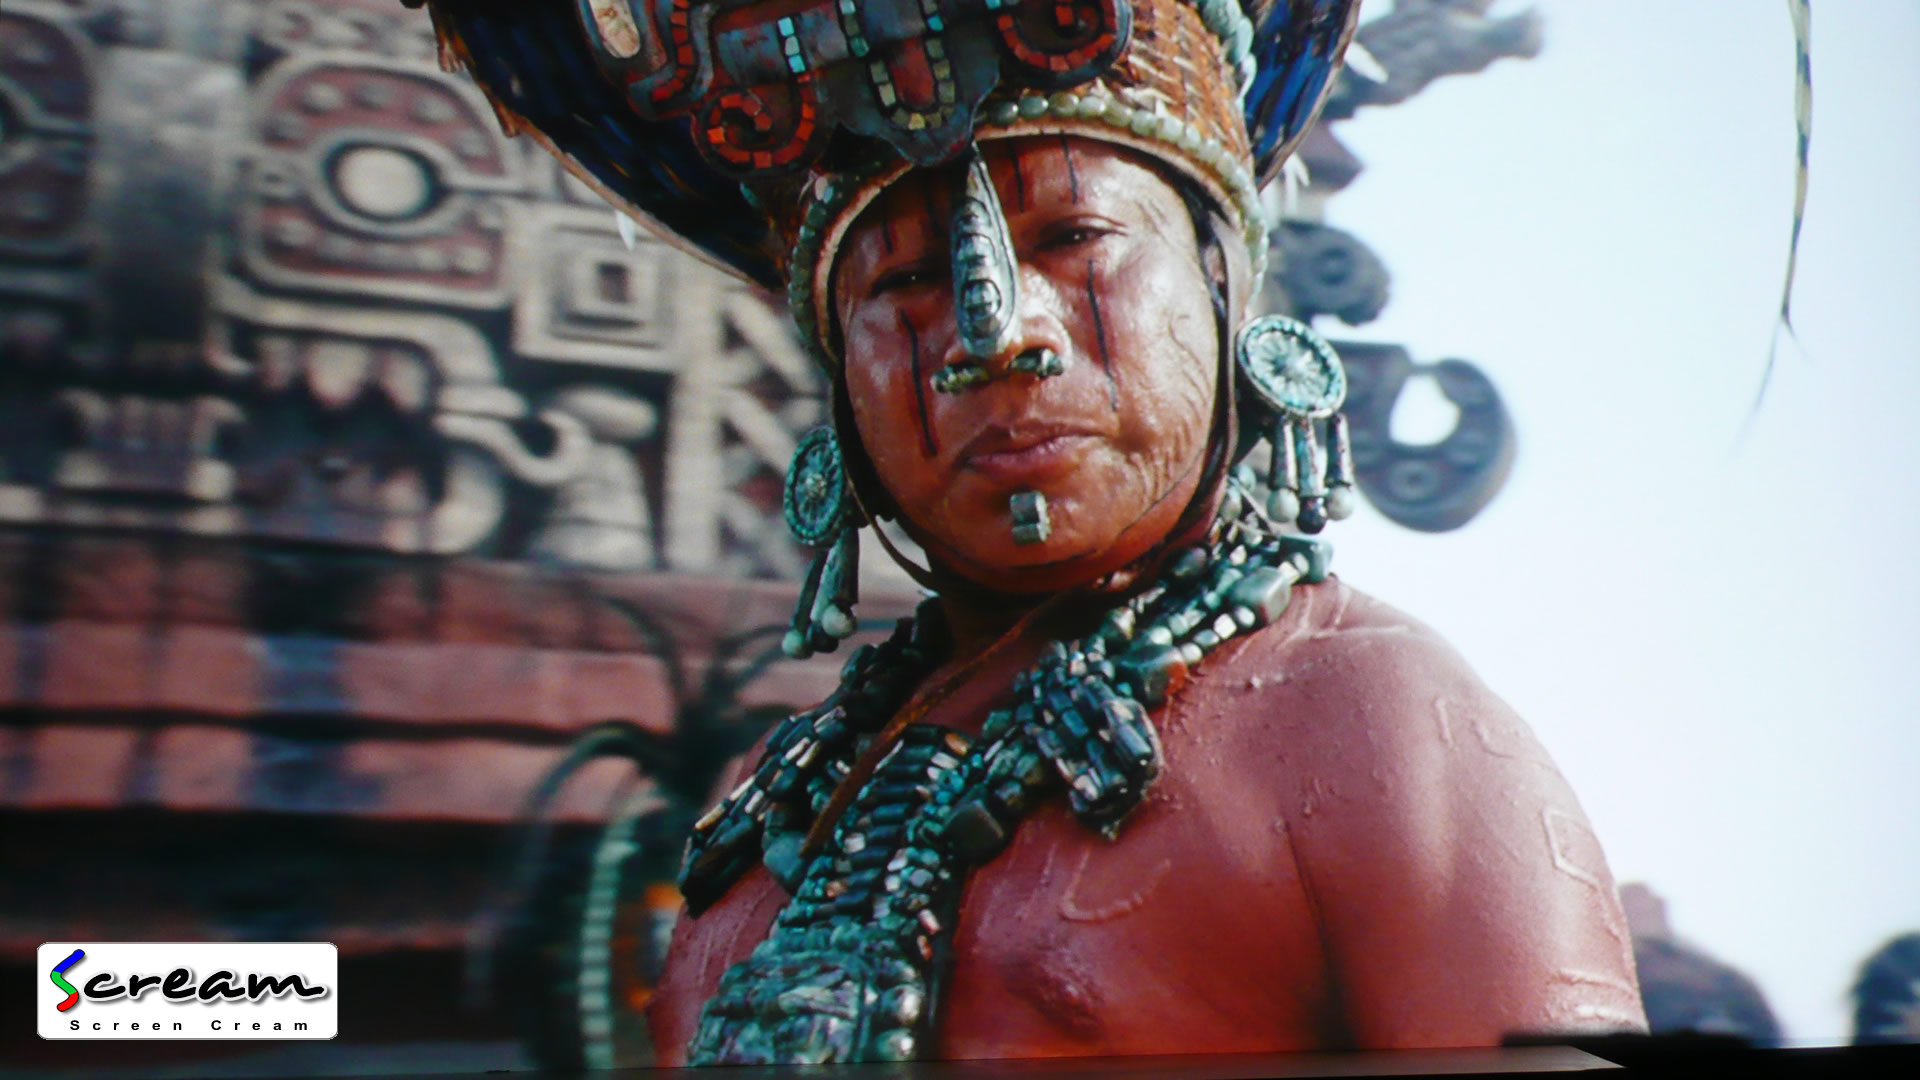 Actual projected image of Apocalypto